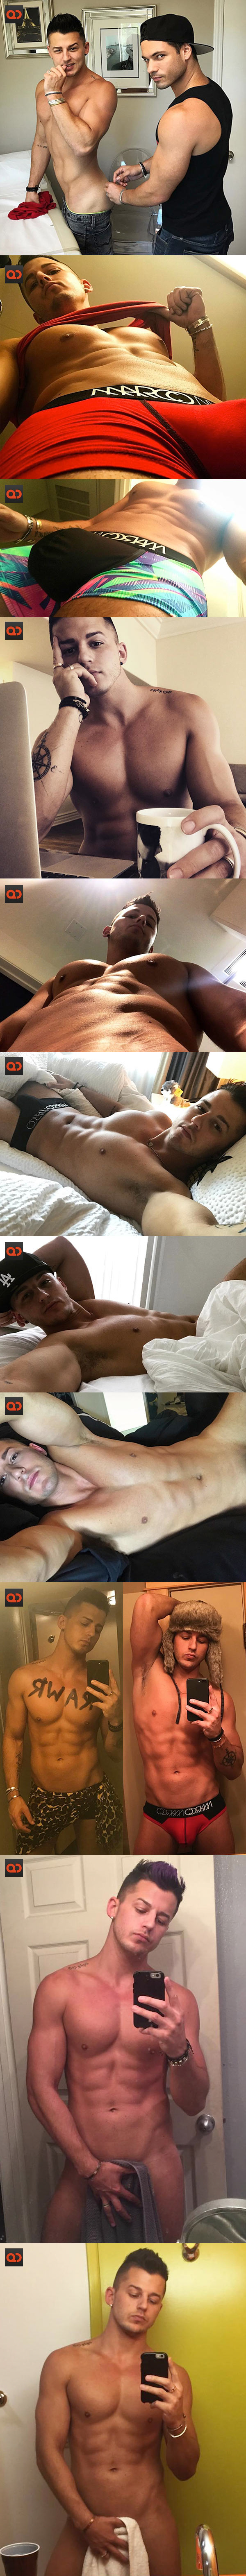 Murray Swanby, From E! Reality Show “What Happens At The Abbey”, Naked Selfies From His Past Surface!